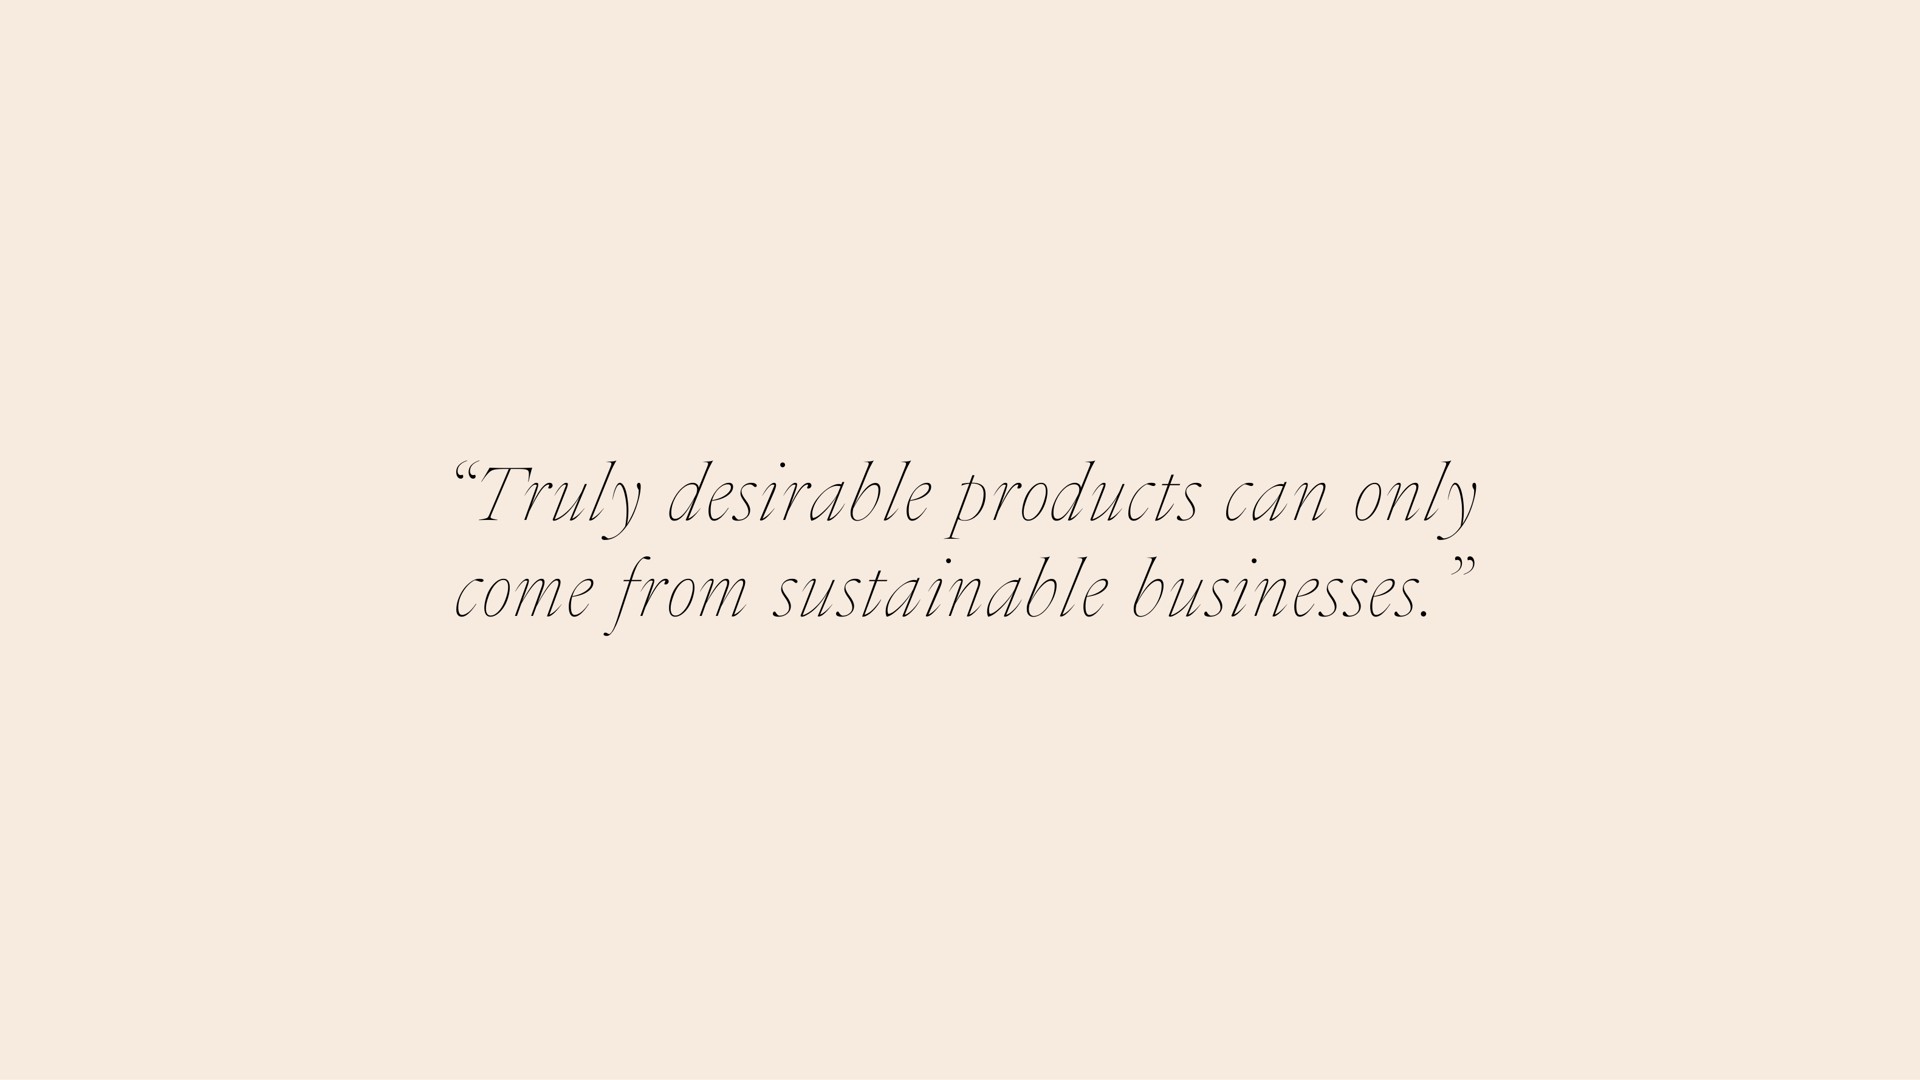 truly desirable products can only come from sustainable businesses | LVMH